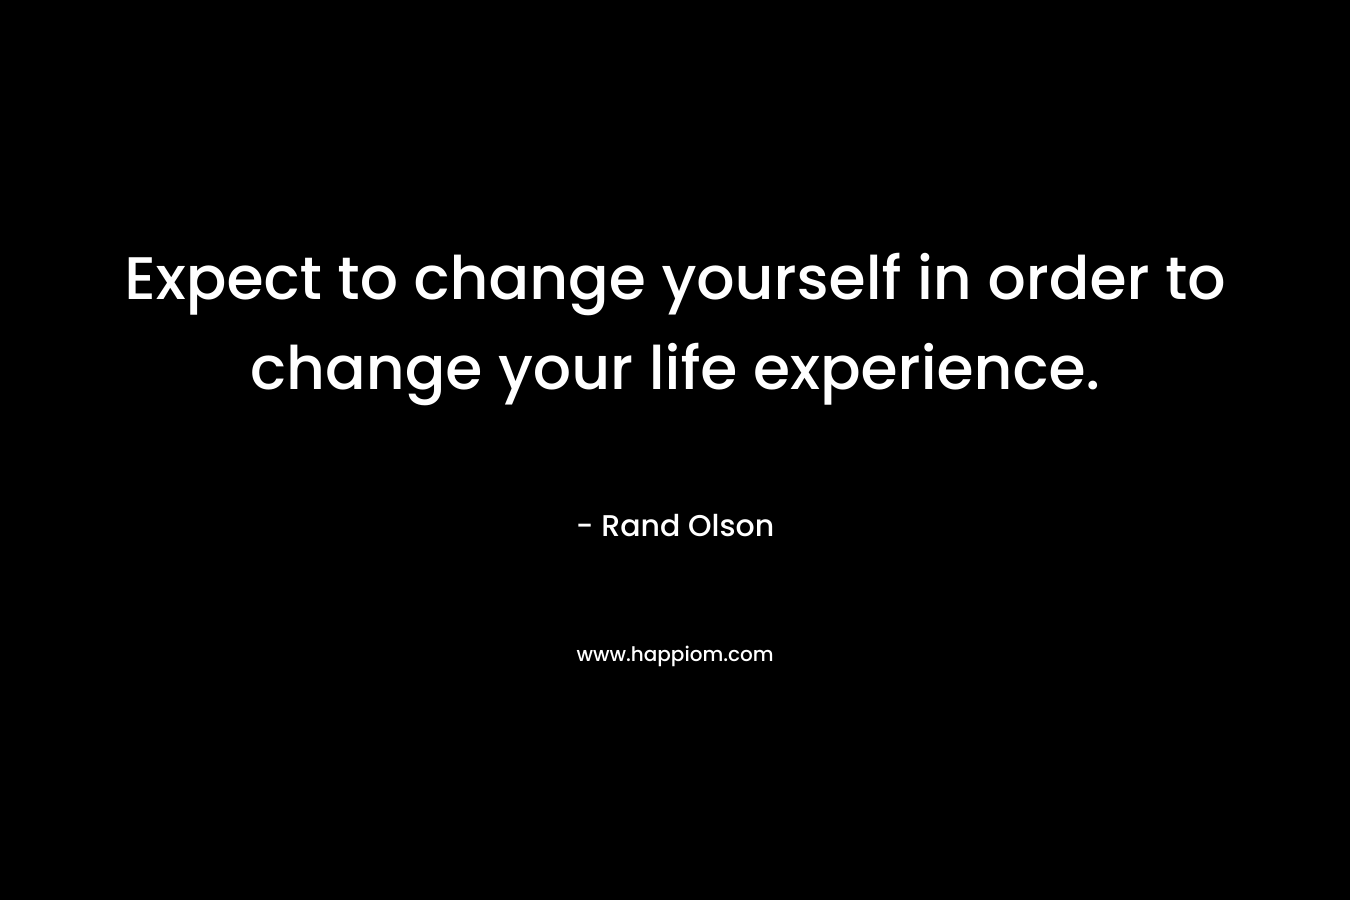 Expect to change yourself in order to change your life experience.